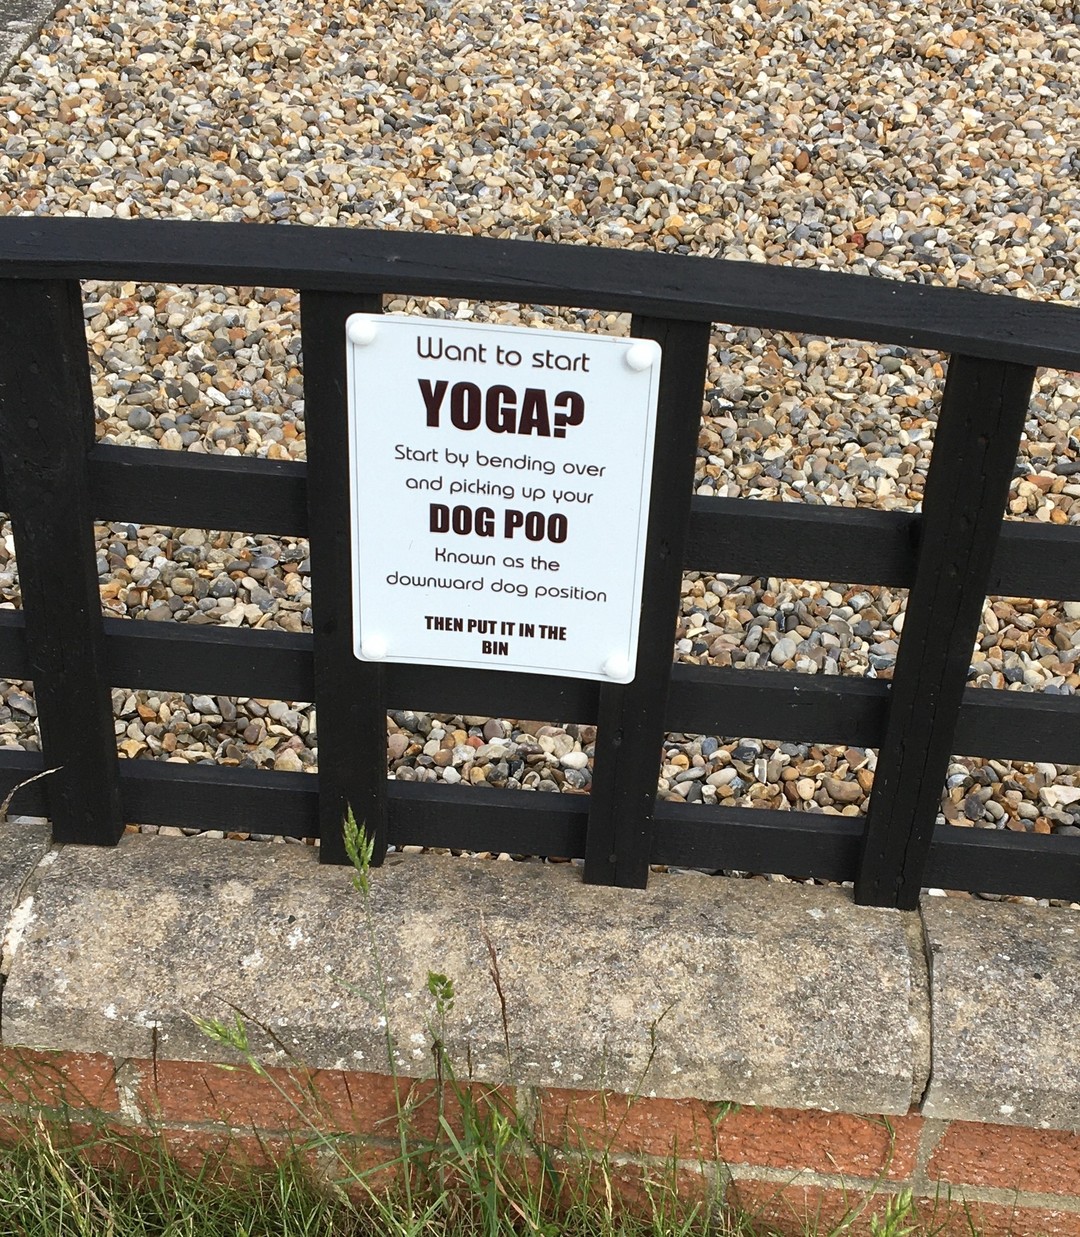 Spotted whilst out jogging - it made me laugh, any excuse to bring yoga into everyday life😃